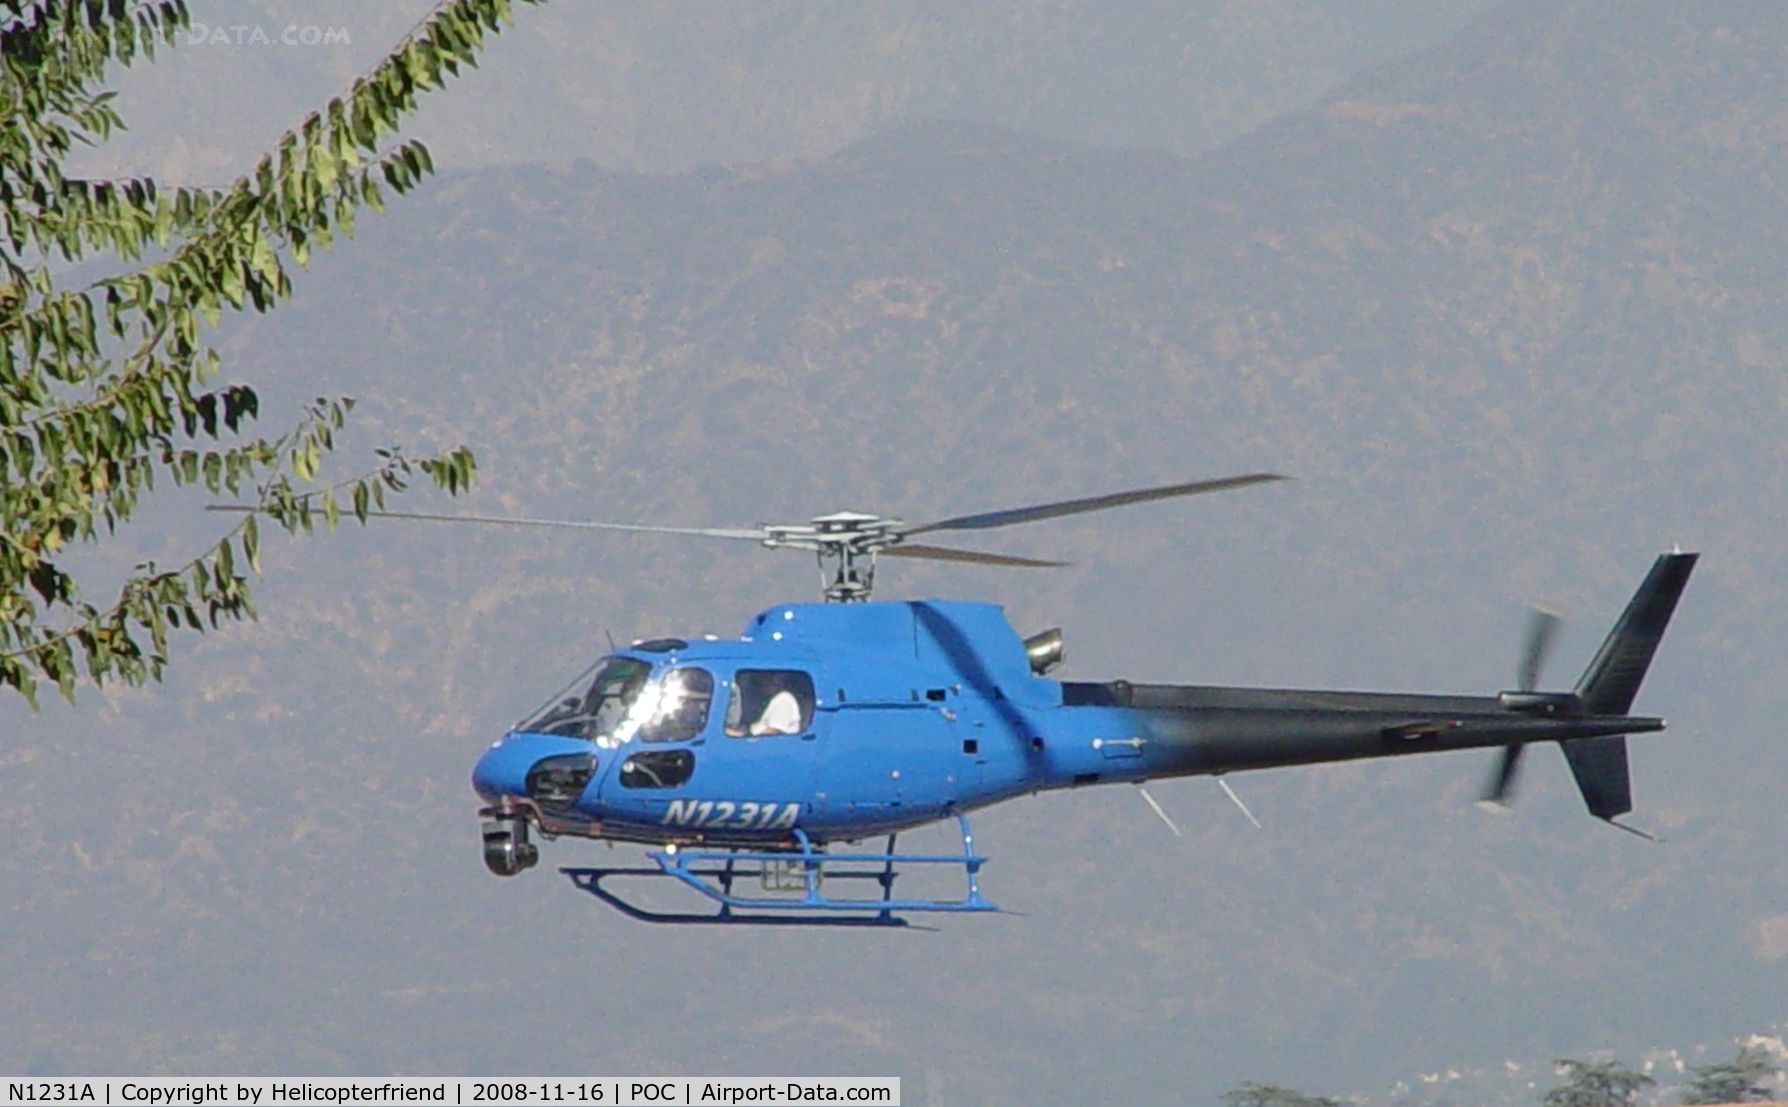 N1231A, 2003 Eurocopter AS-350B-2 Ecureuil Ecureuil C/N 3682, Ready to touch down